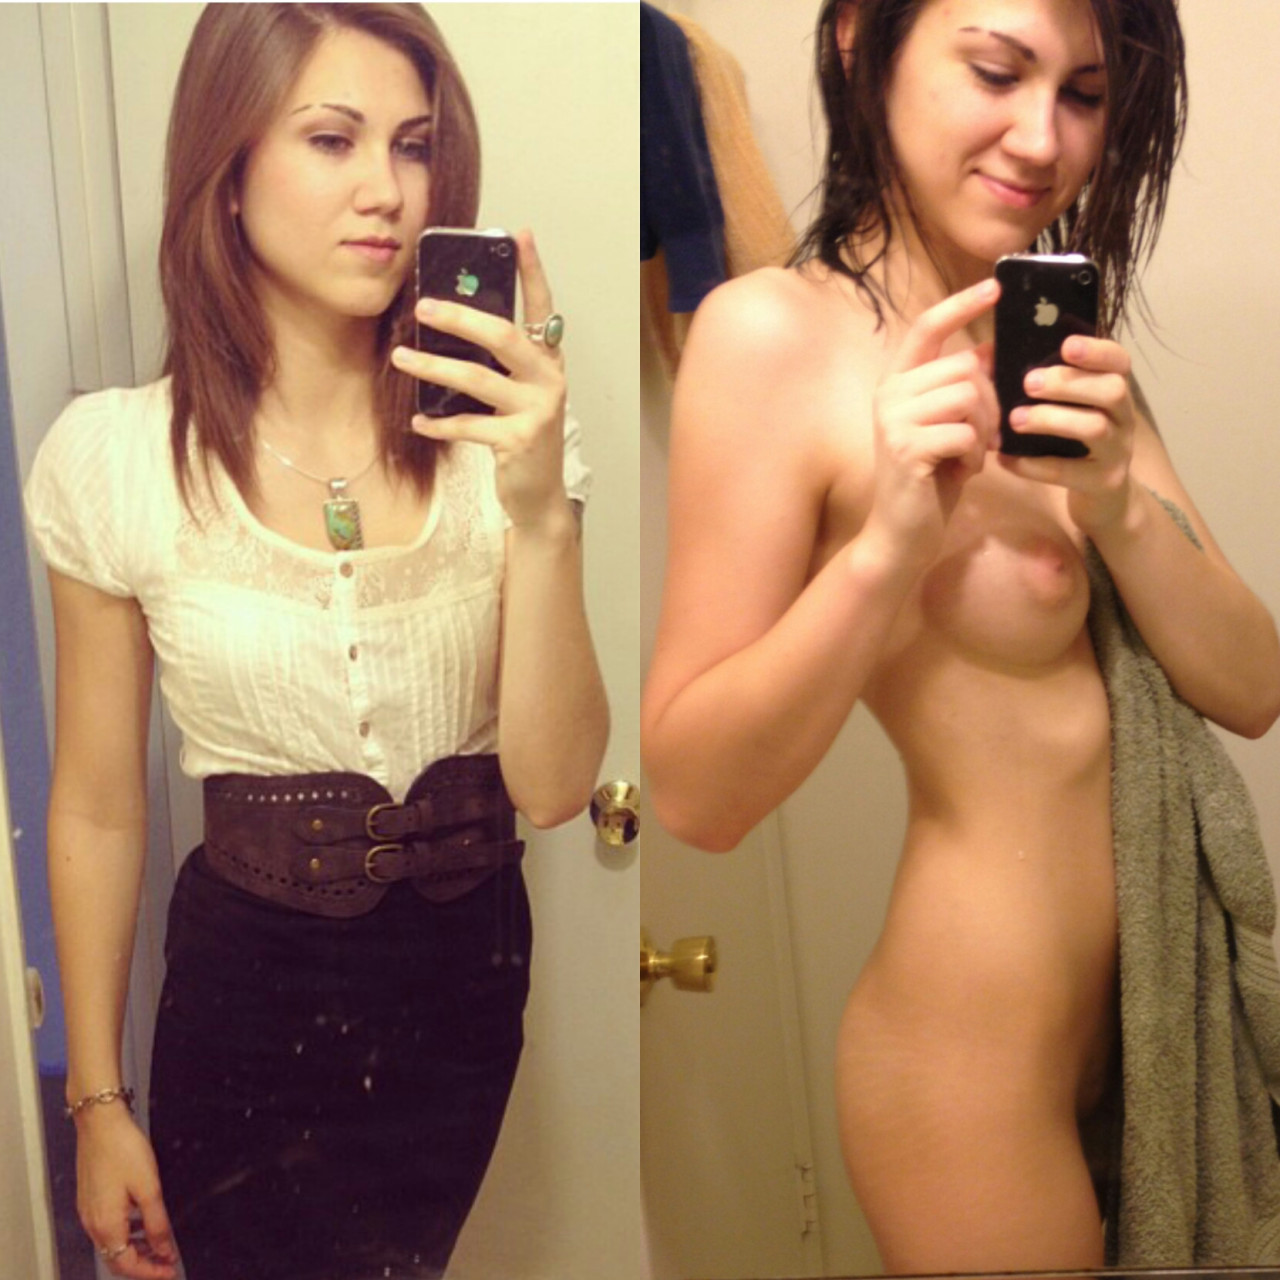 Before and after shower